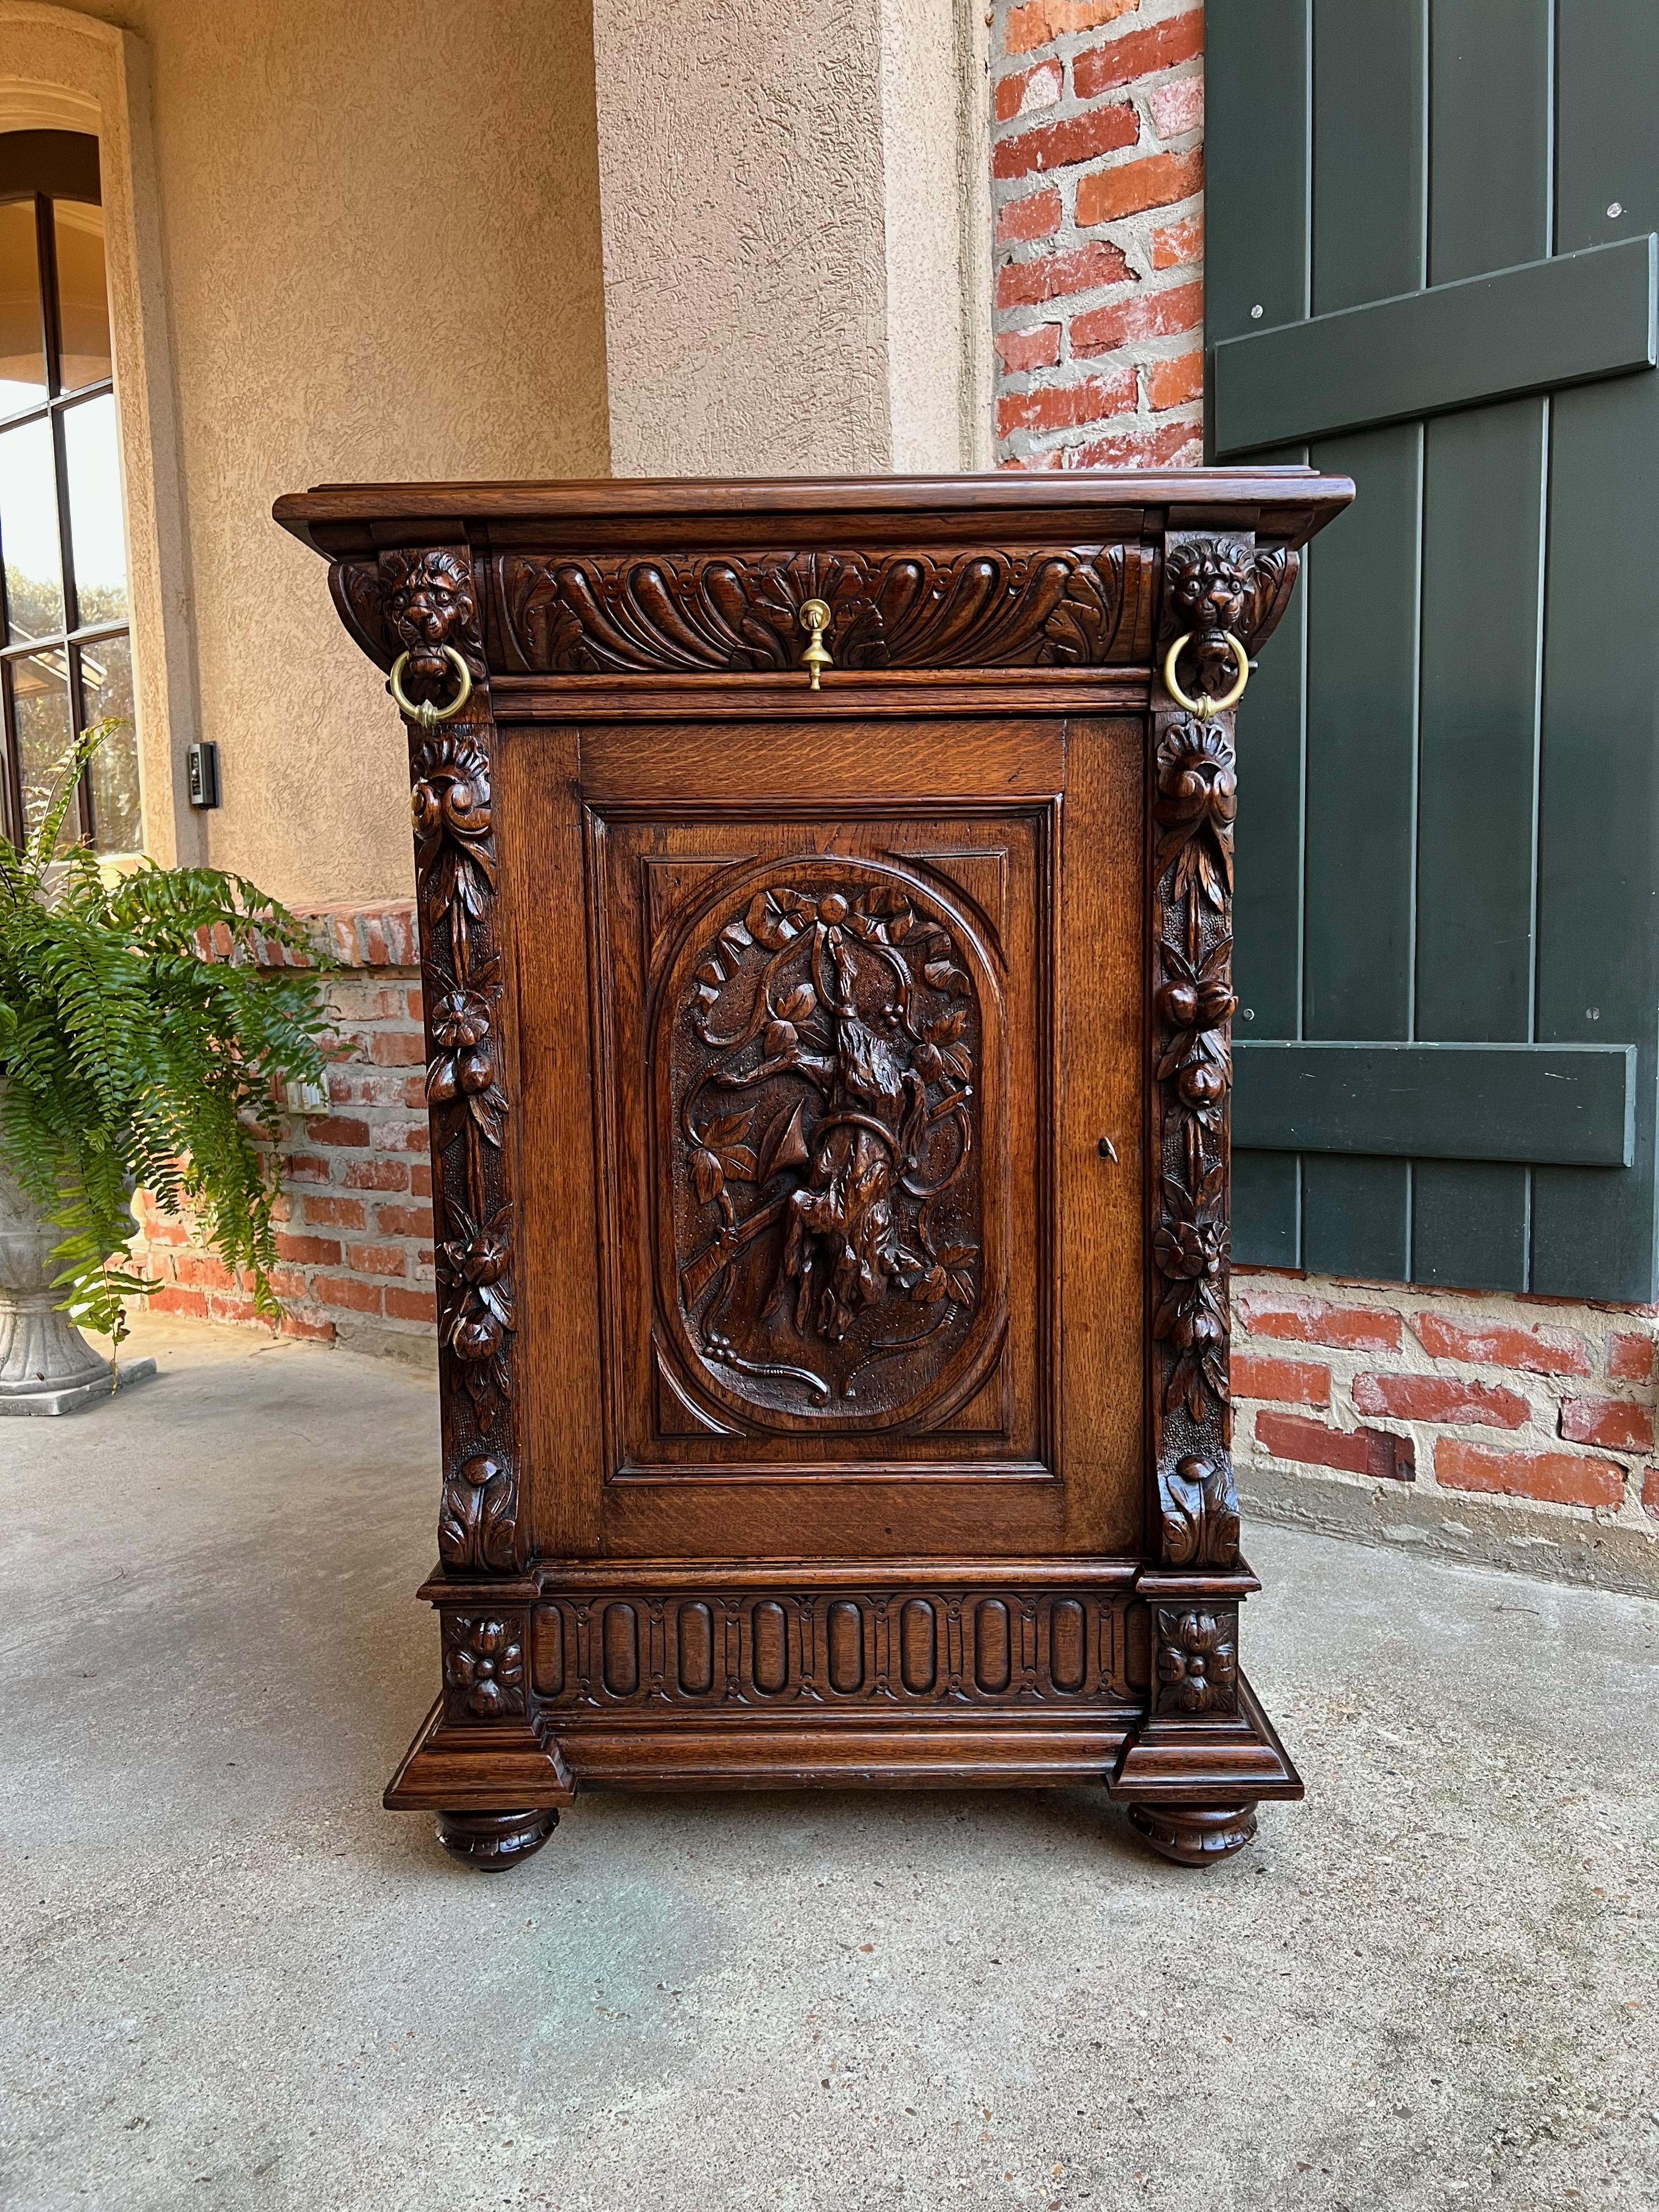 19th century French carved oak hunt cabinet confiturier black forest rabbits 

Directly imported from France, a beautifully hand carved 19th century French confiturier cabinet.
Beveled edge cabinet top over the carved frieze that features a full